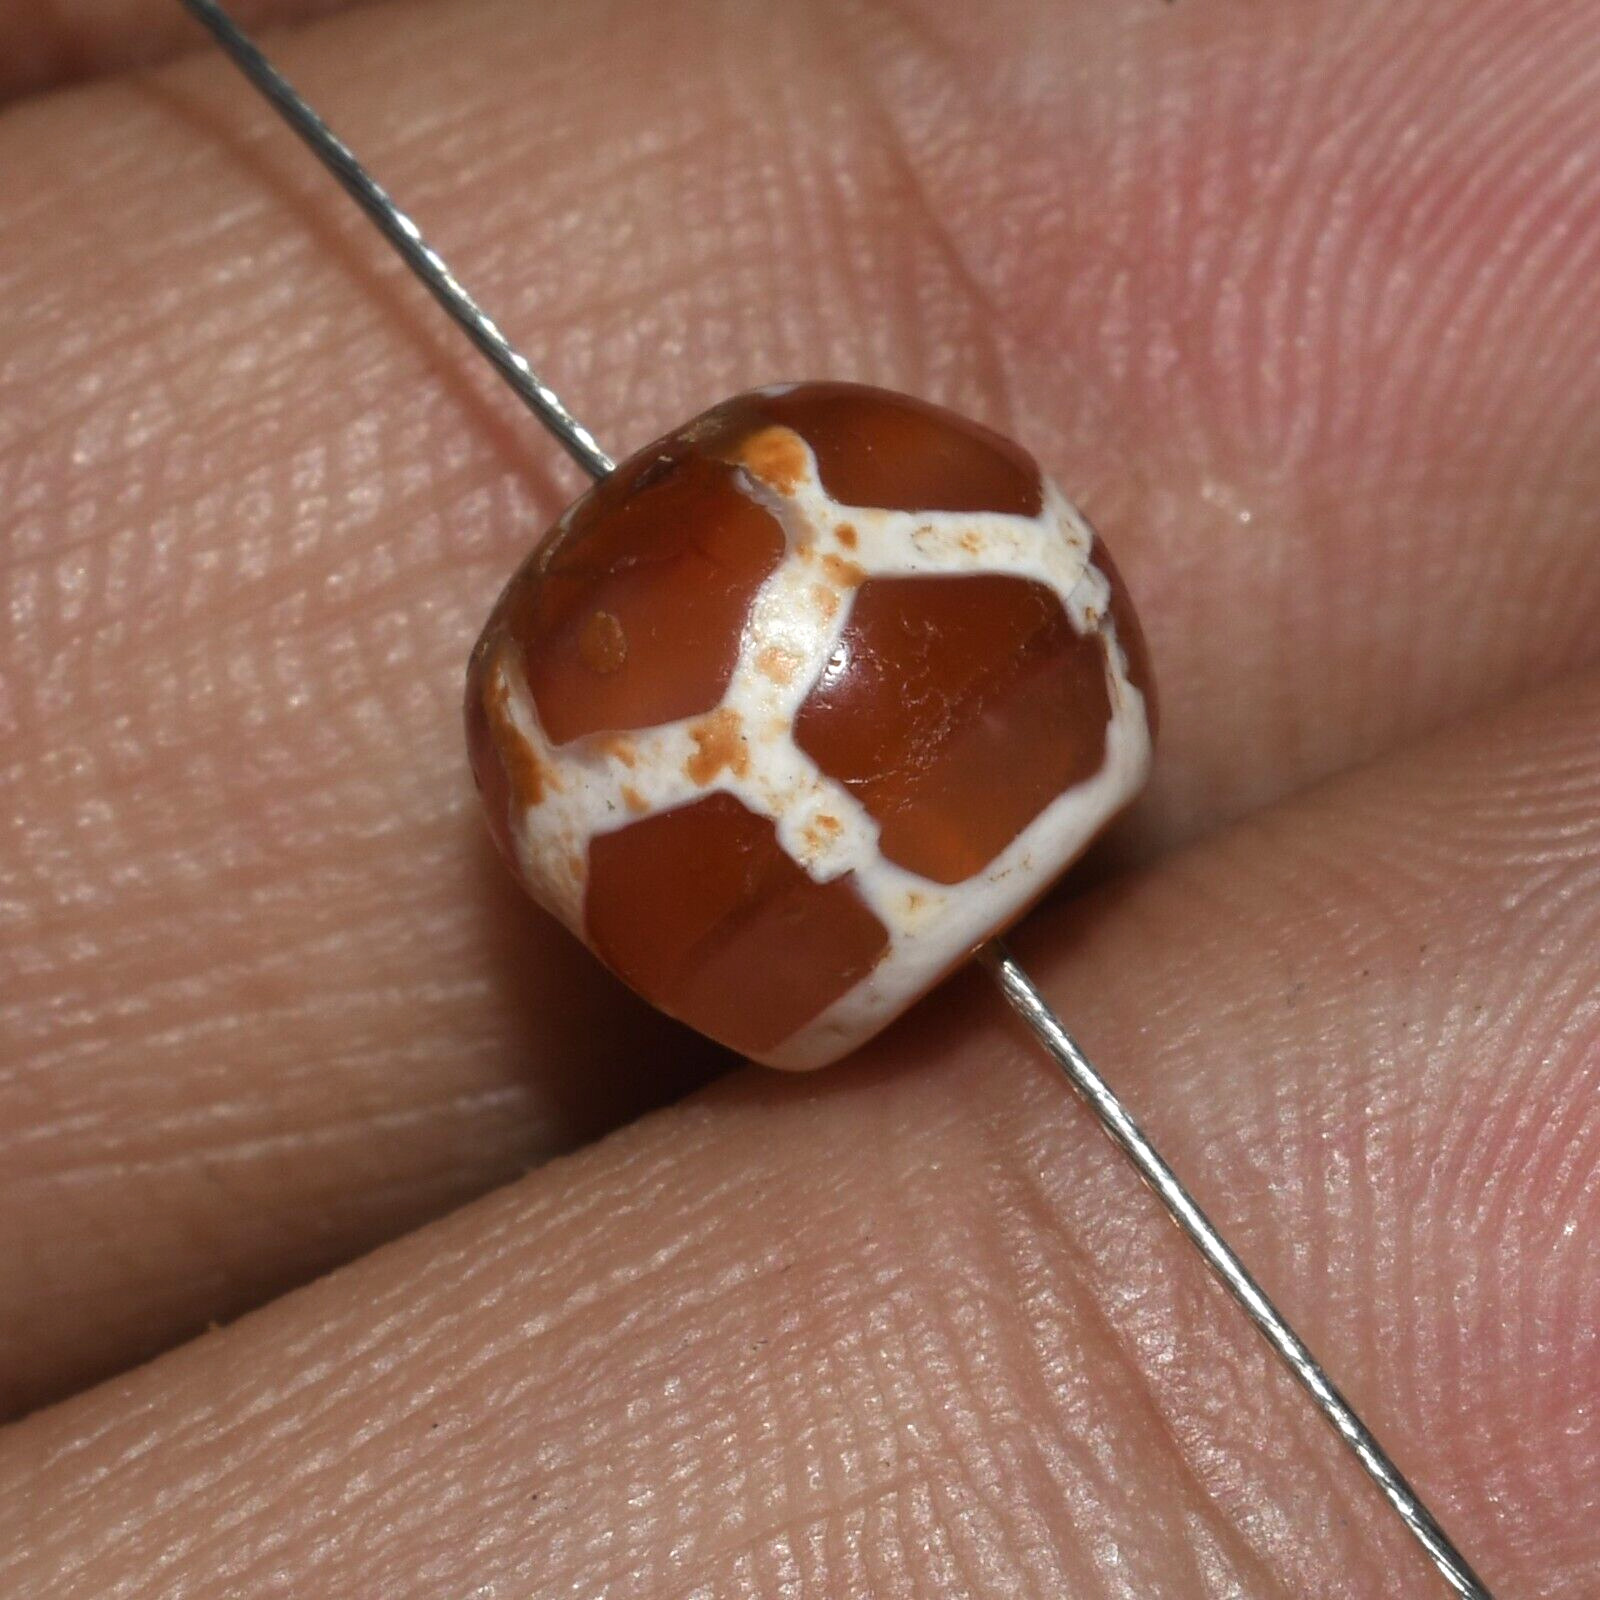 Ancient Etched Carnelian Longevity Dzi Bead in Good Condition over 1500+ Years